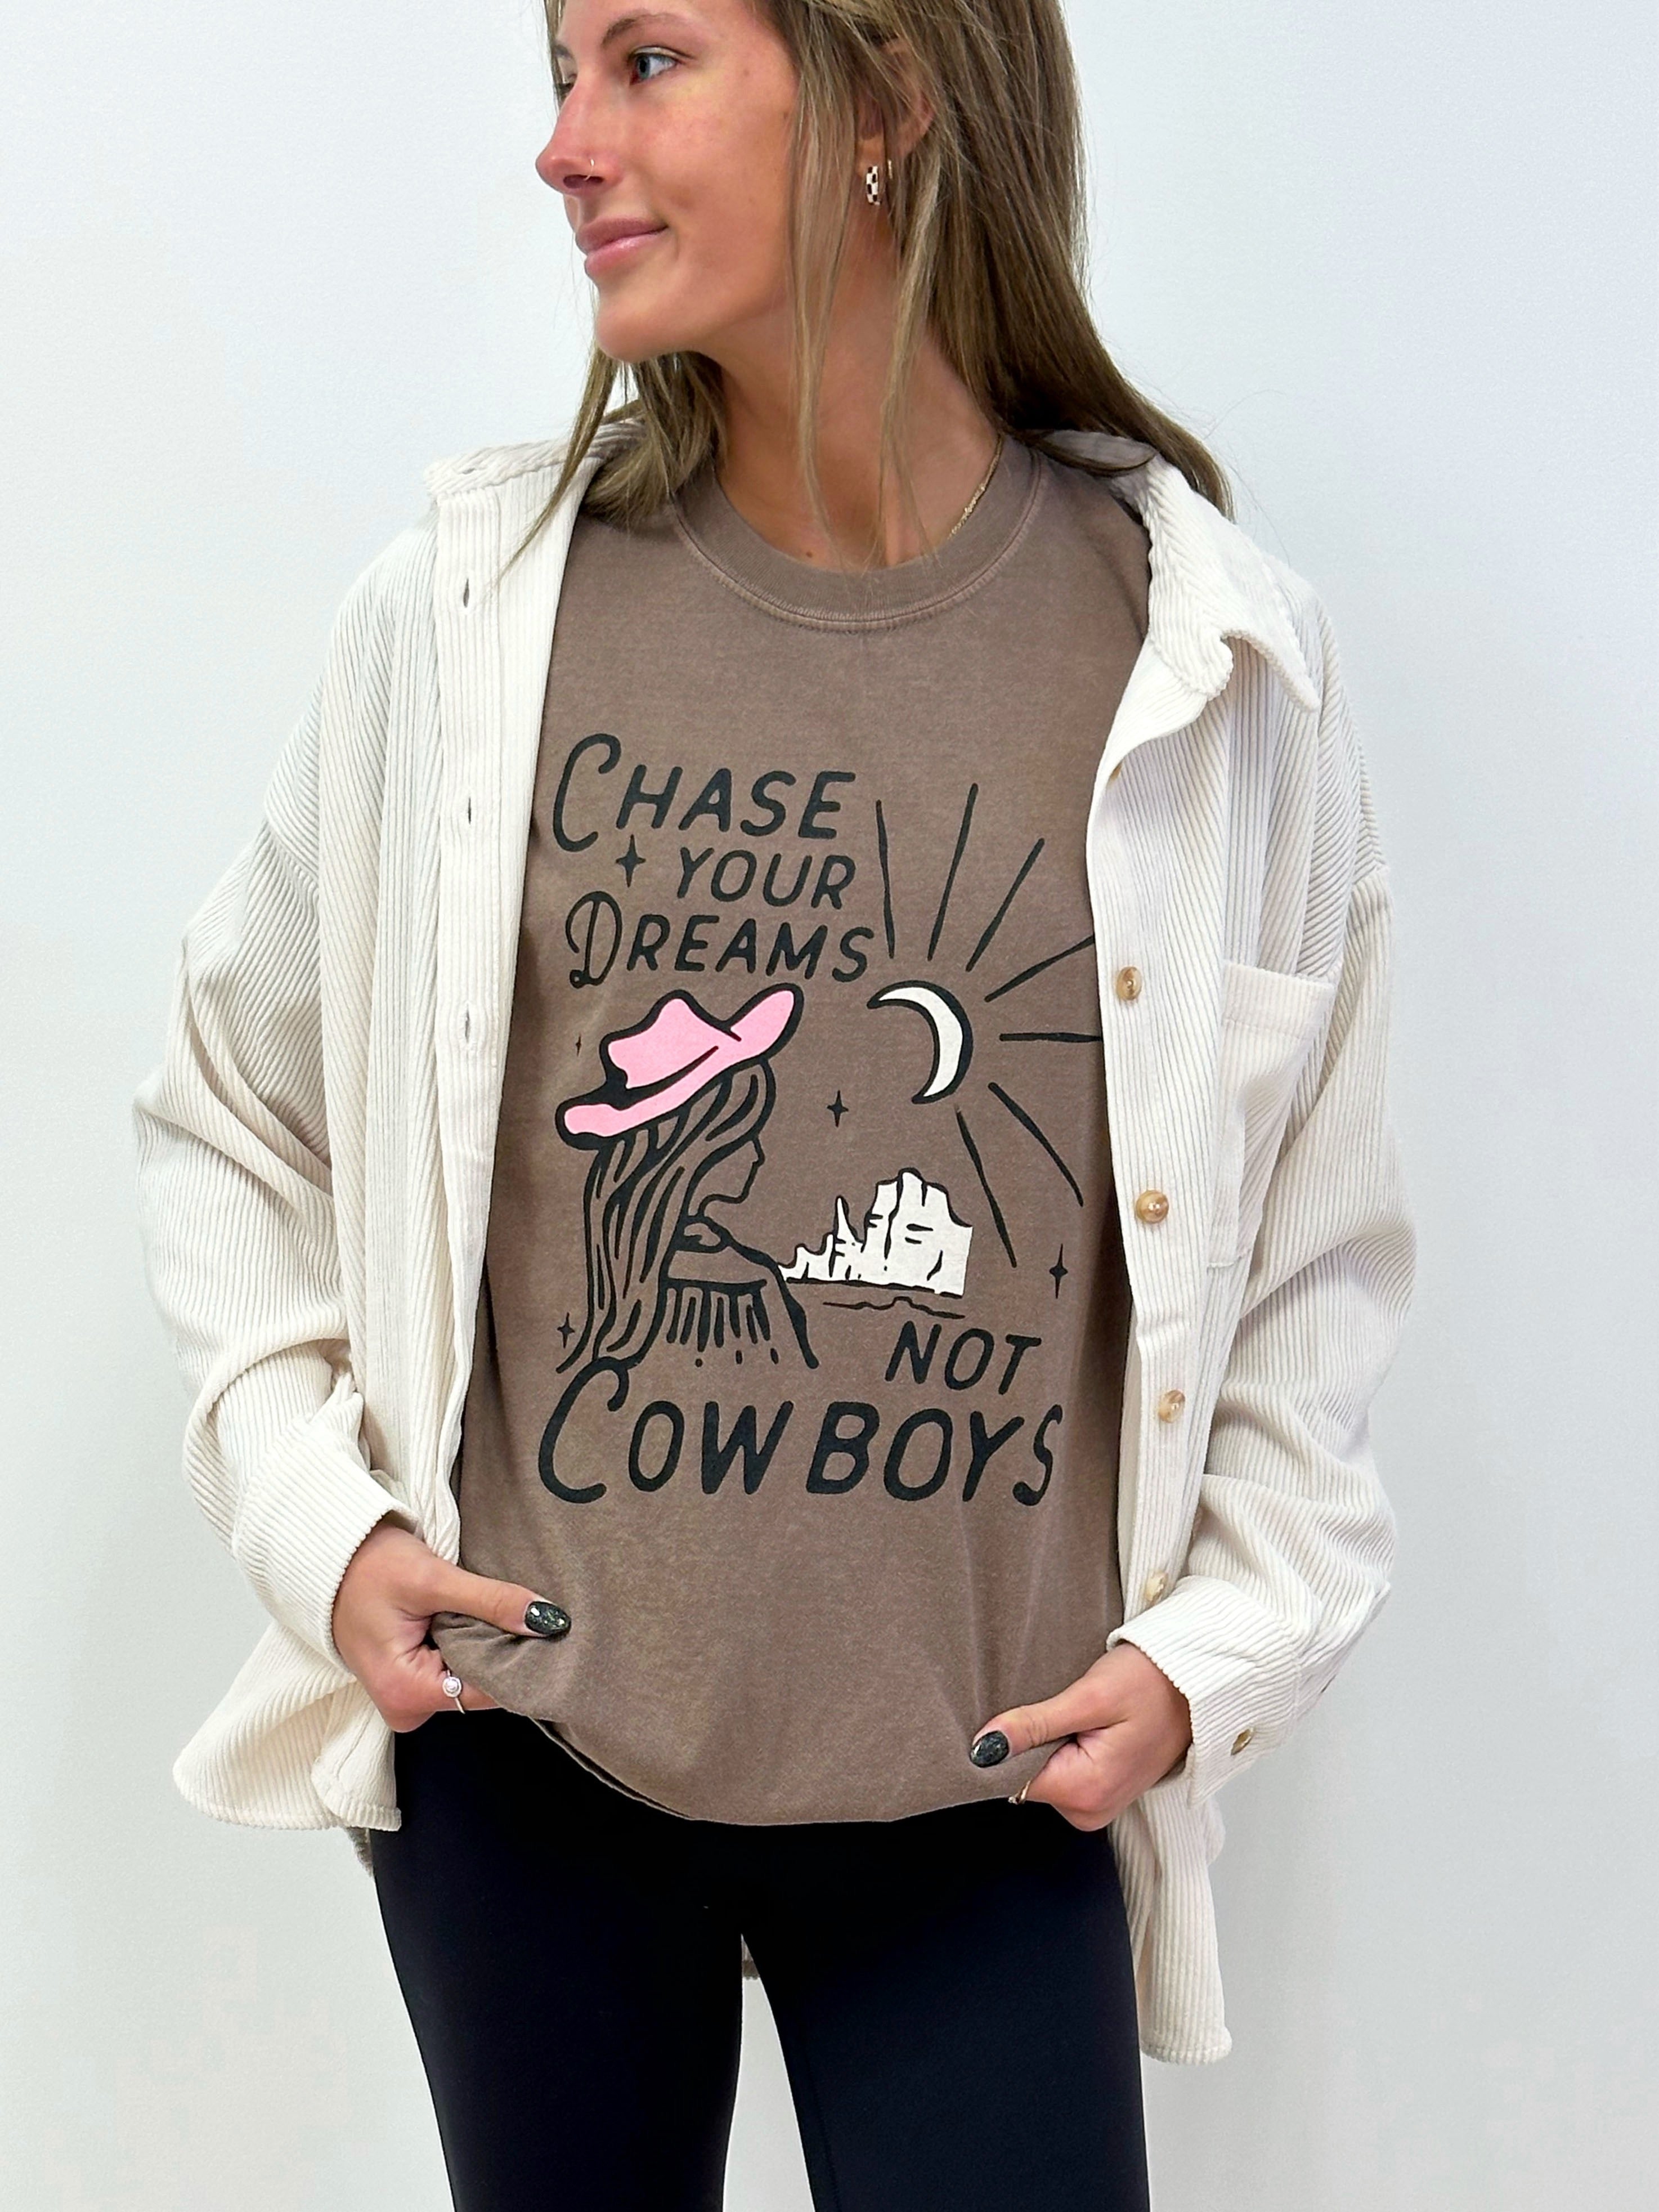 Chase Dreams - YEEHAW